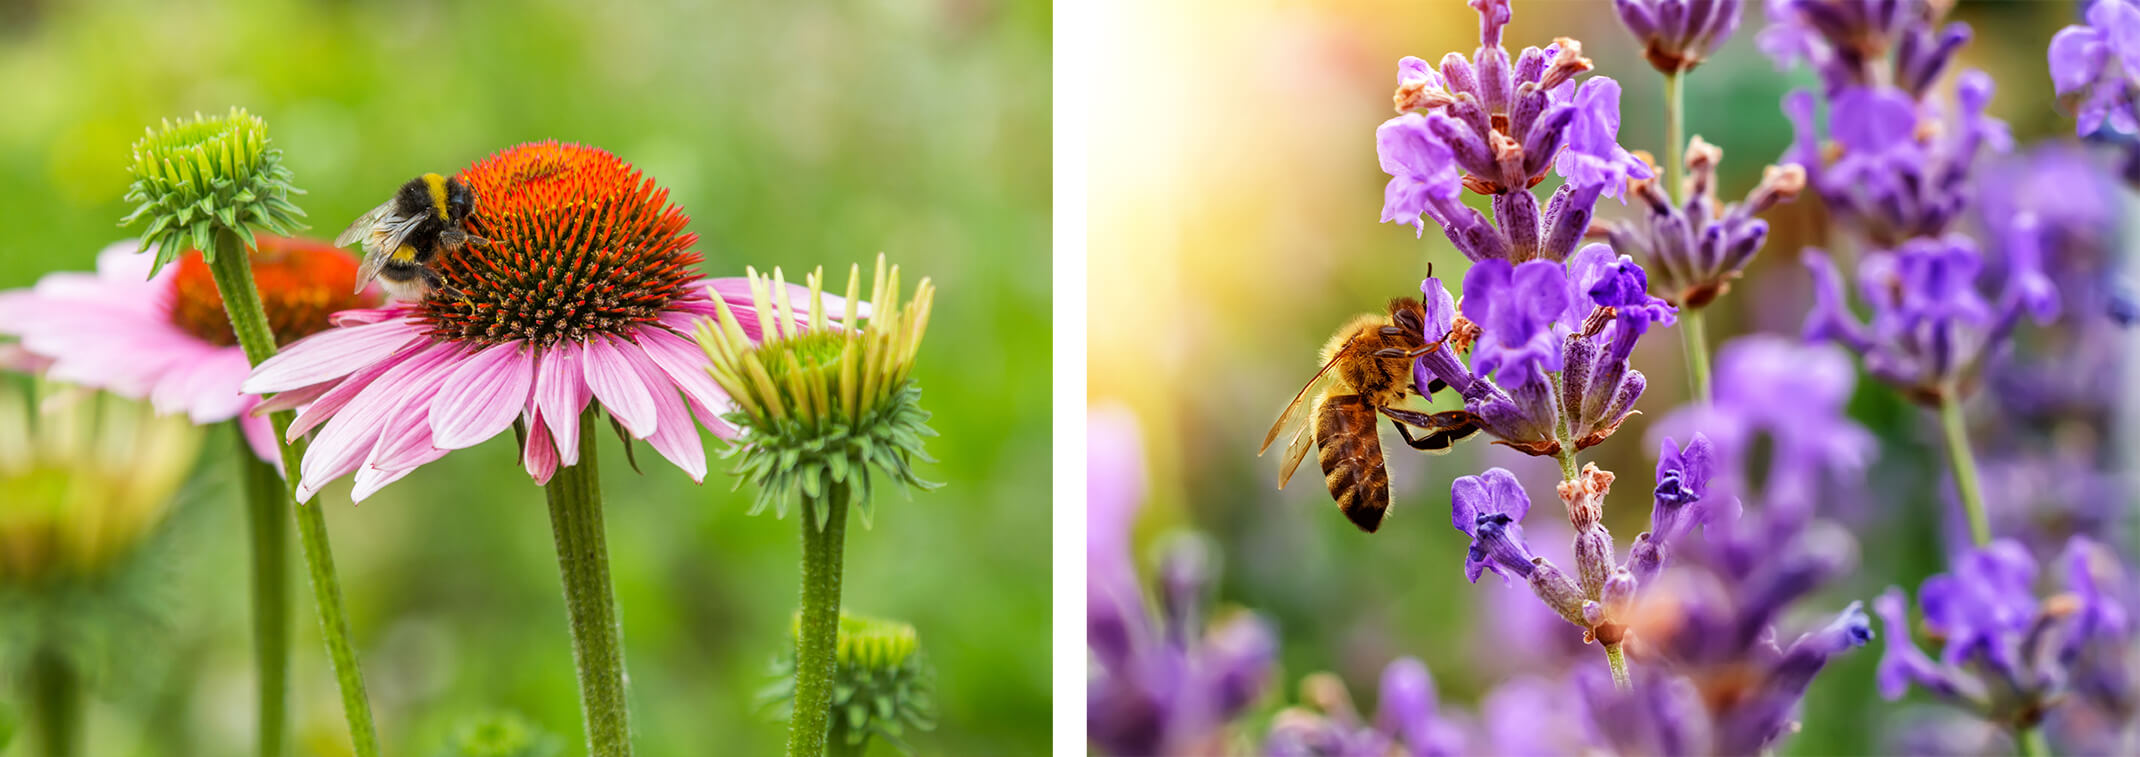 2 images: a bumble bee on a coneflower; and a honey bee on some lavender